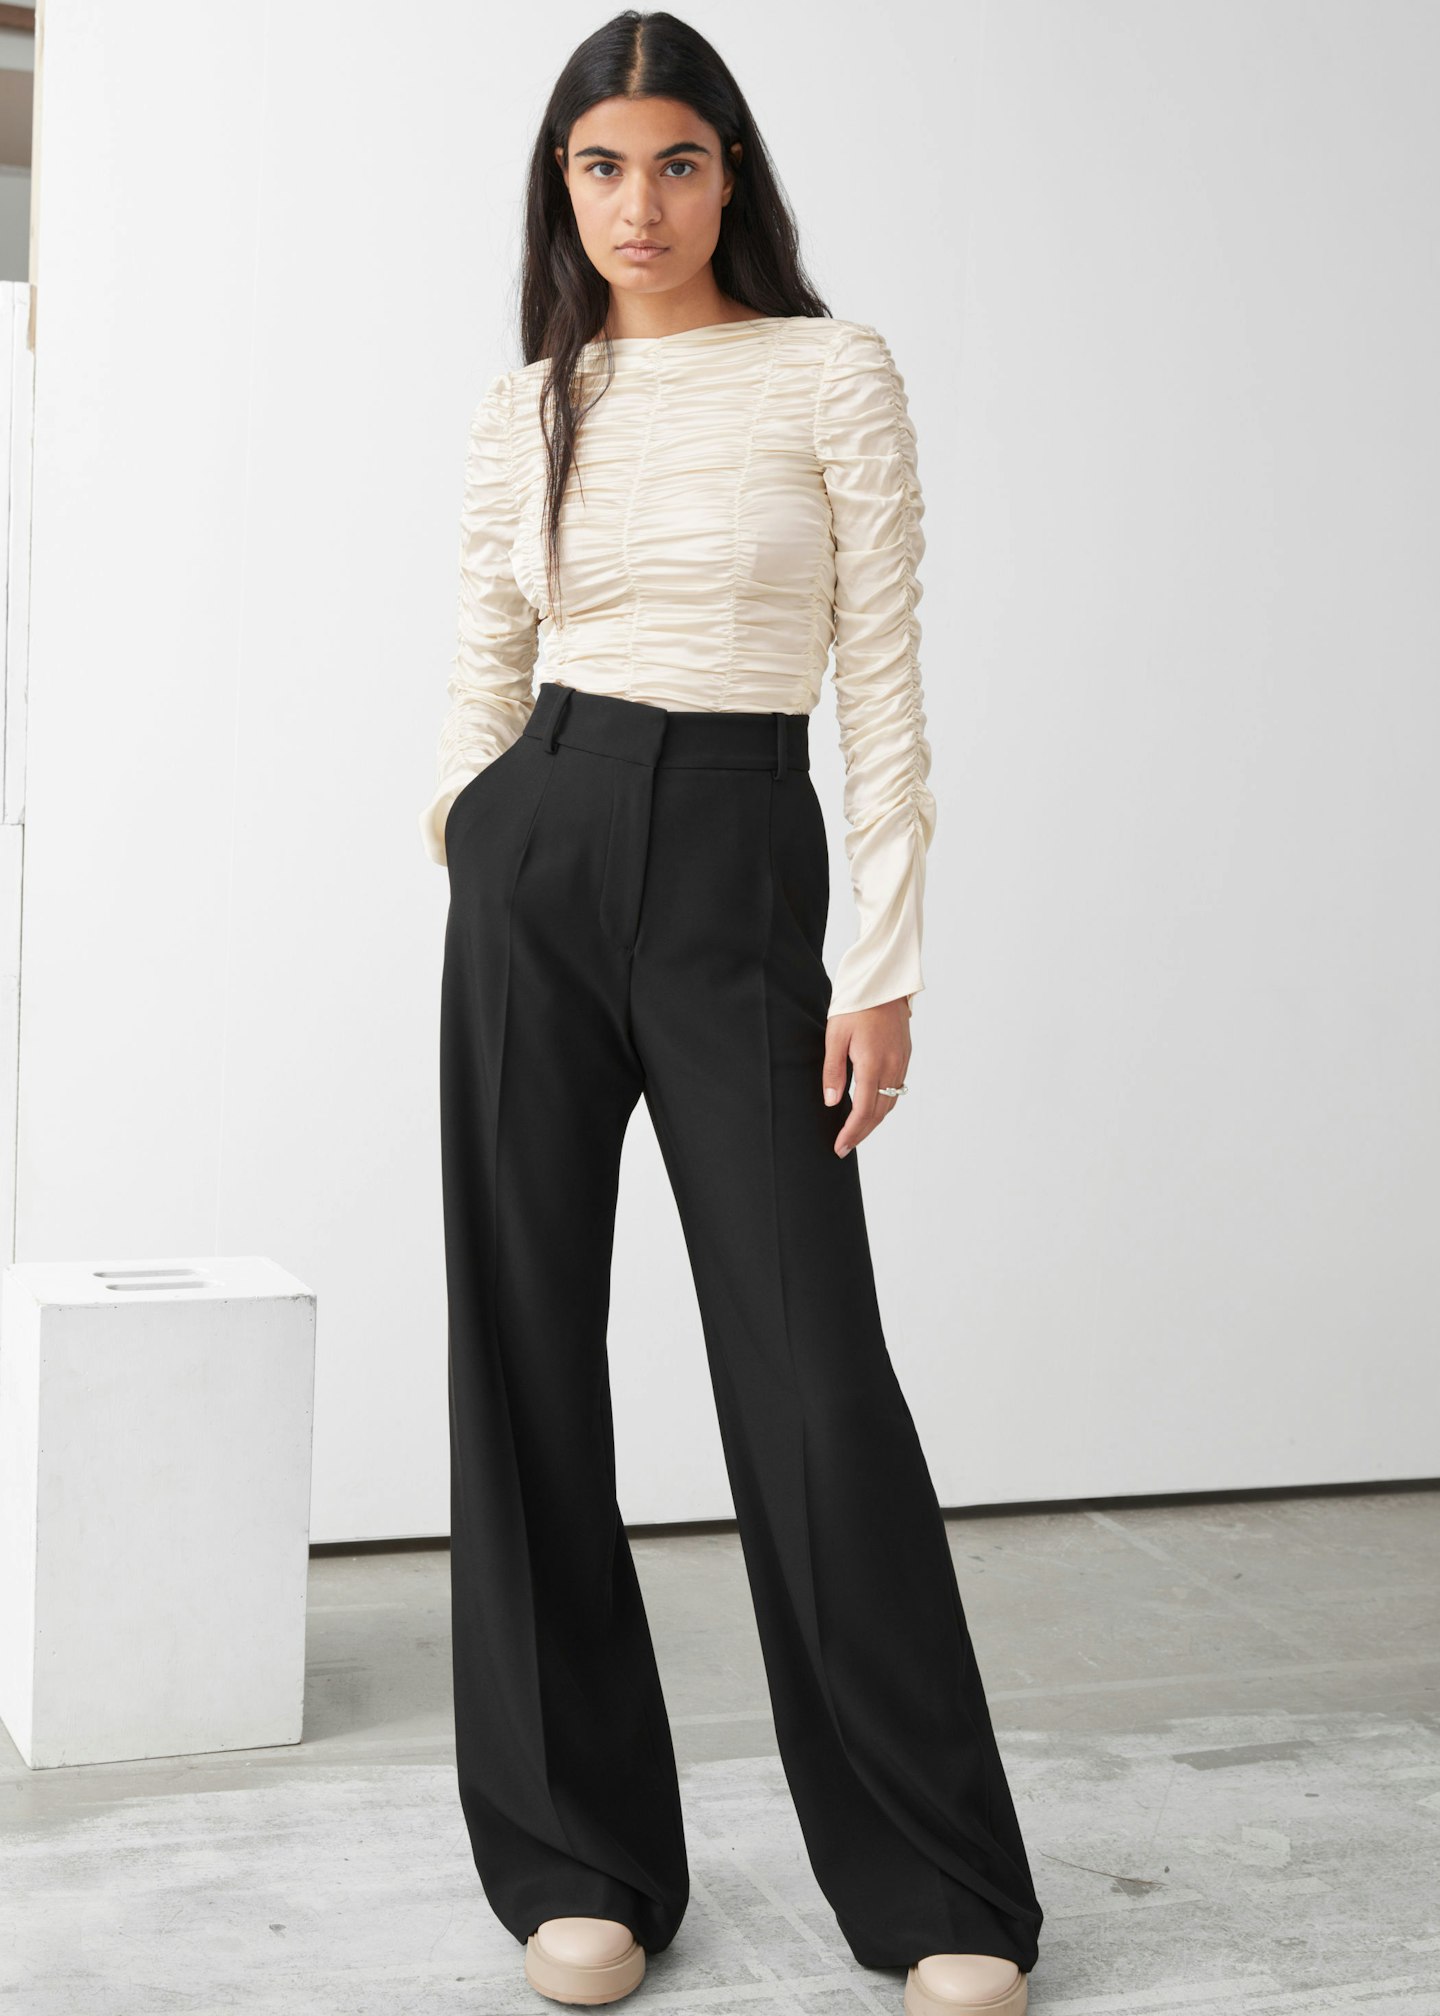 & Other Stories, Wide Flared Trousers, £69